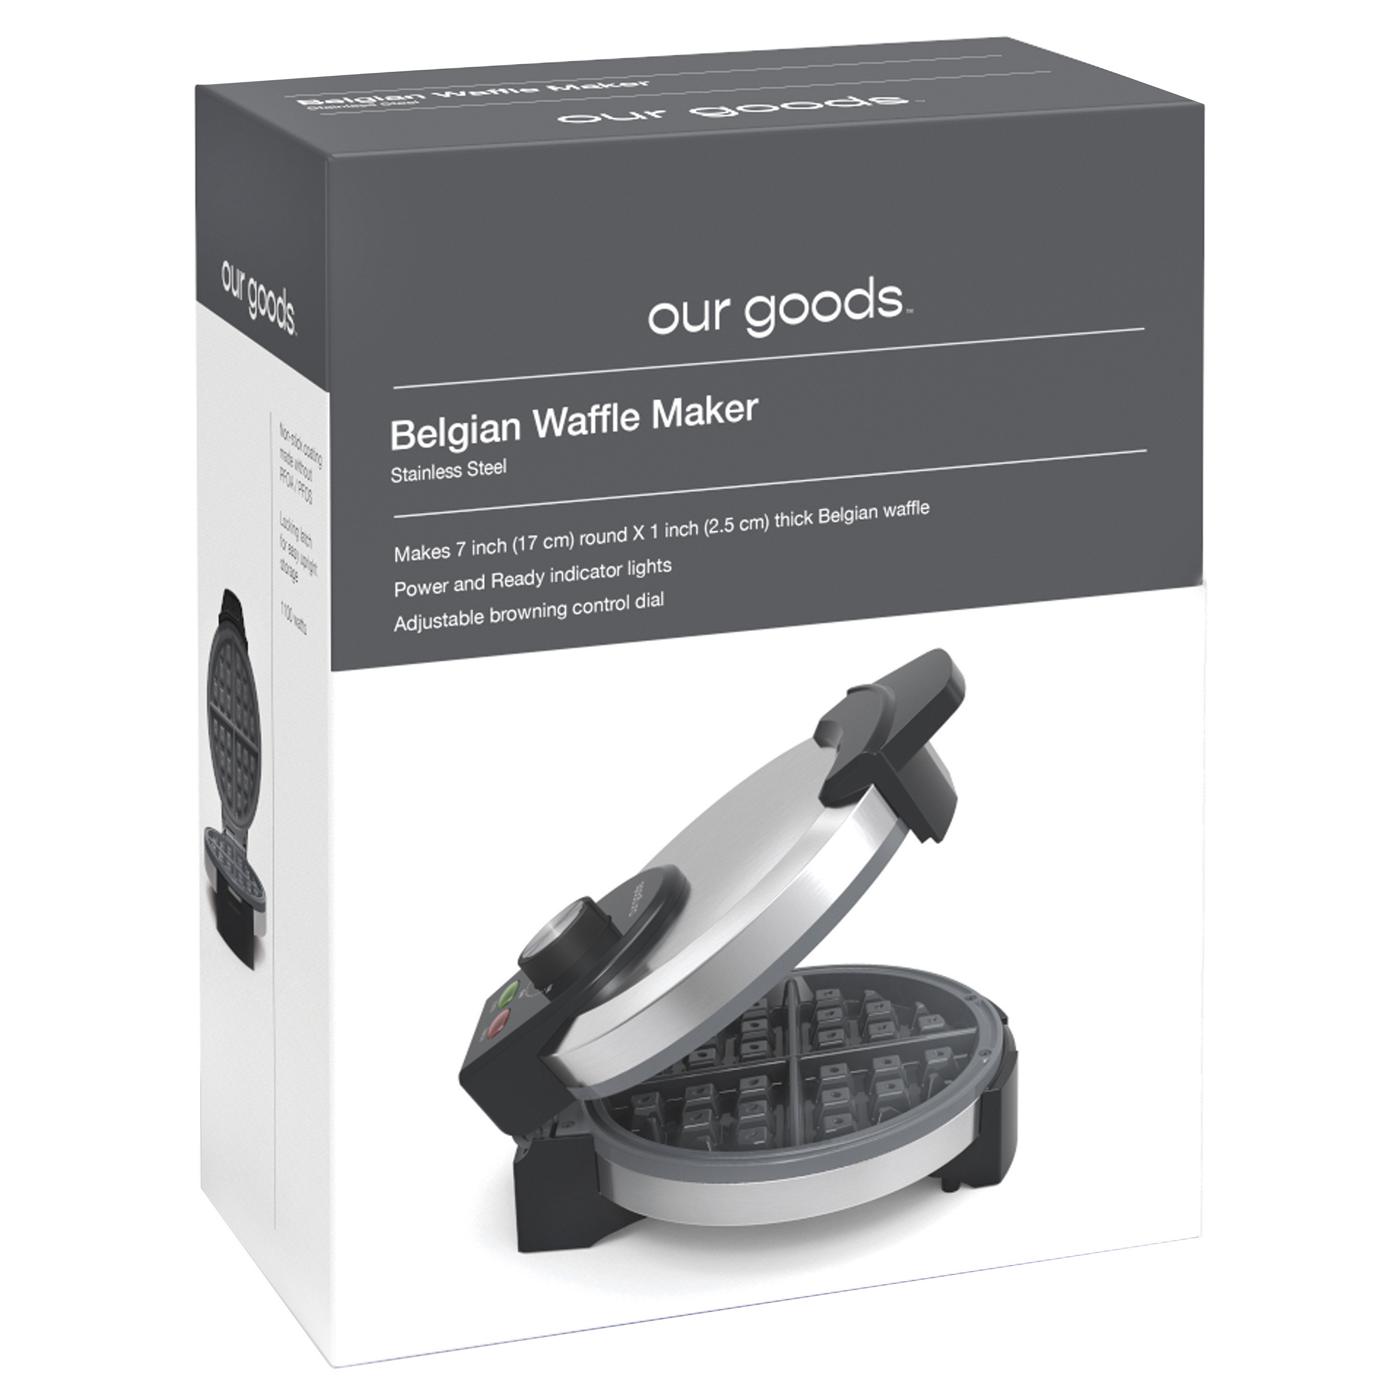 our goods Belgian Waffle Maker - Stainless Steel; image 2 of 3